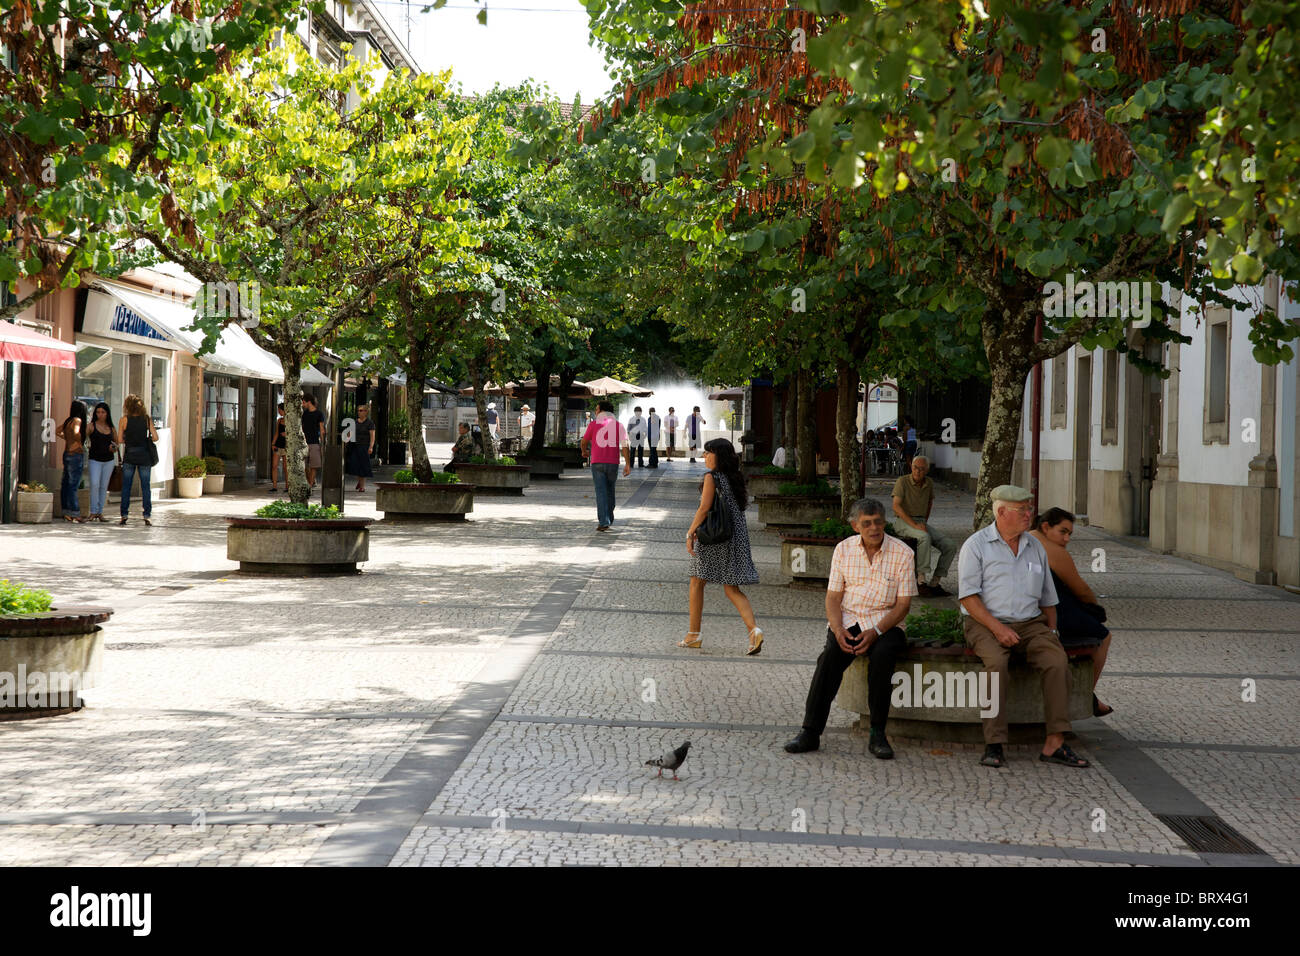 Quiet summer street scene in Braga Portugal. People resting in the shade and walking around the pleasant cobbled streets. Stock Photo